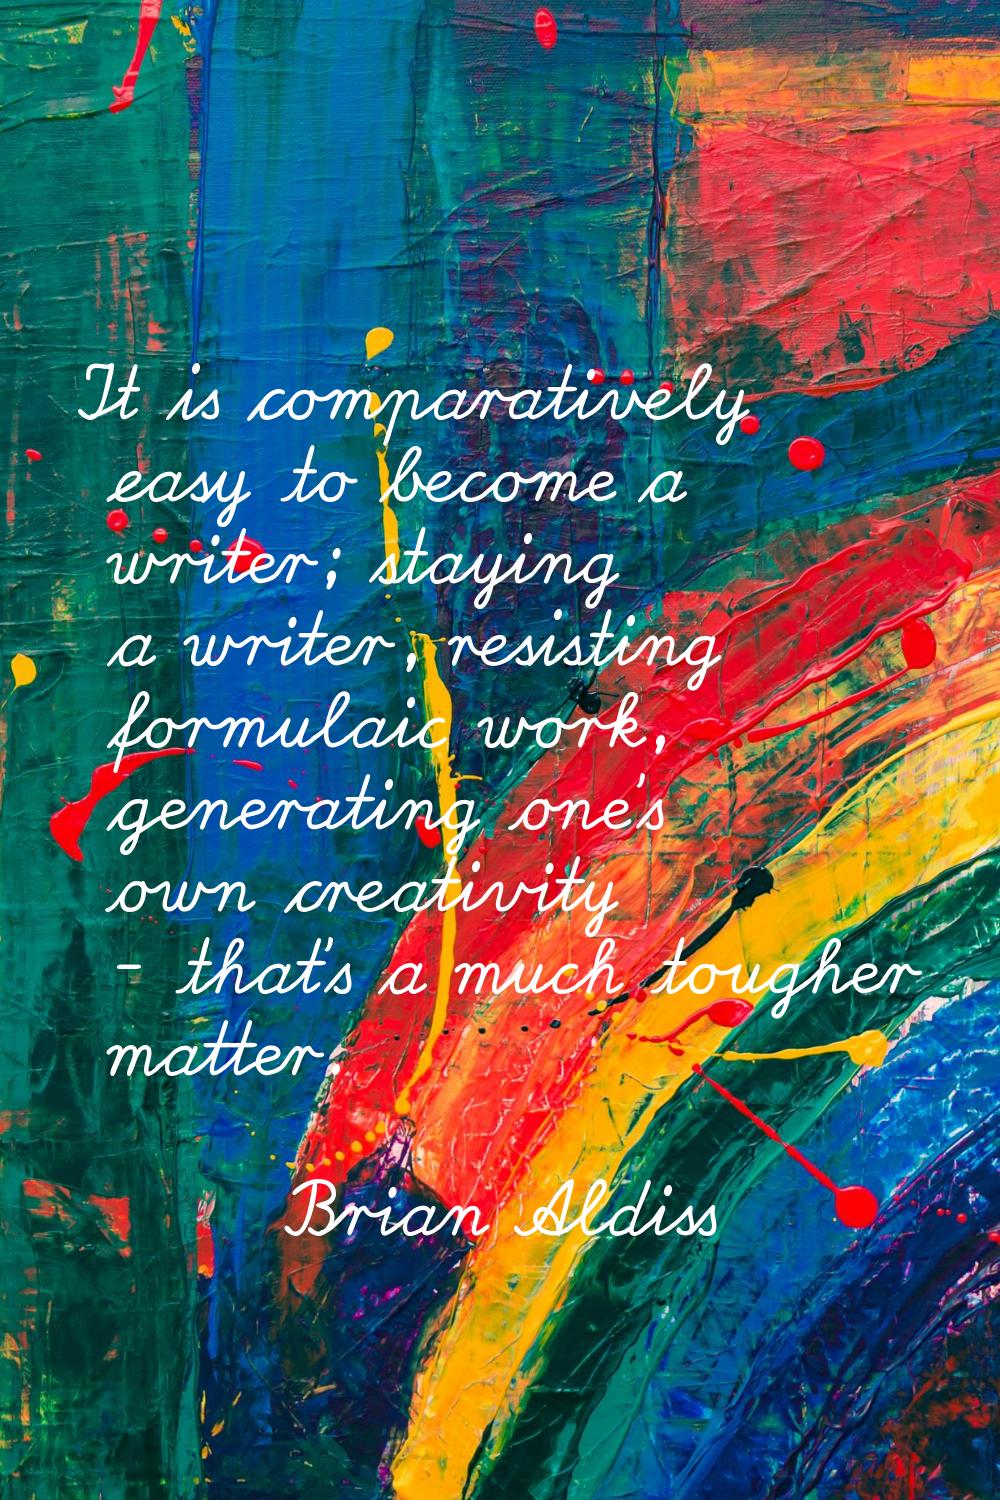 It is comparatively easy to become a writer; staying a writer, resisting formulaic work, generating